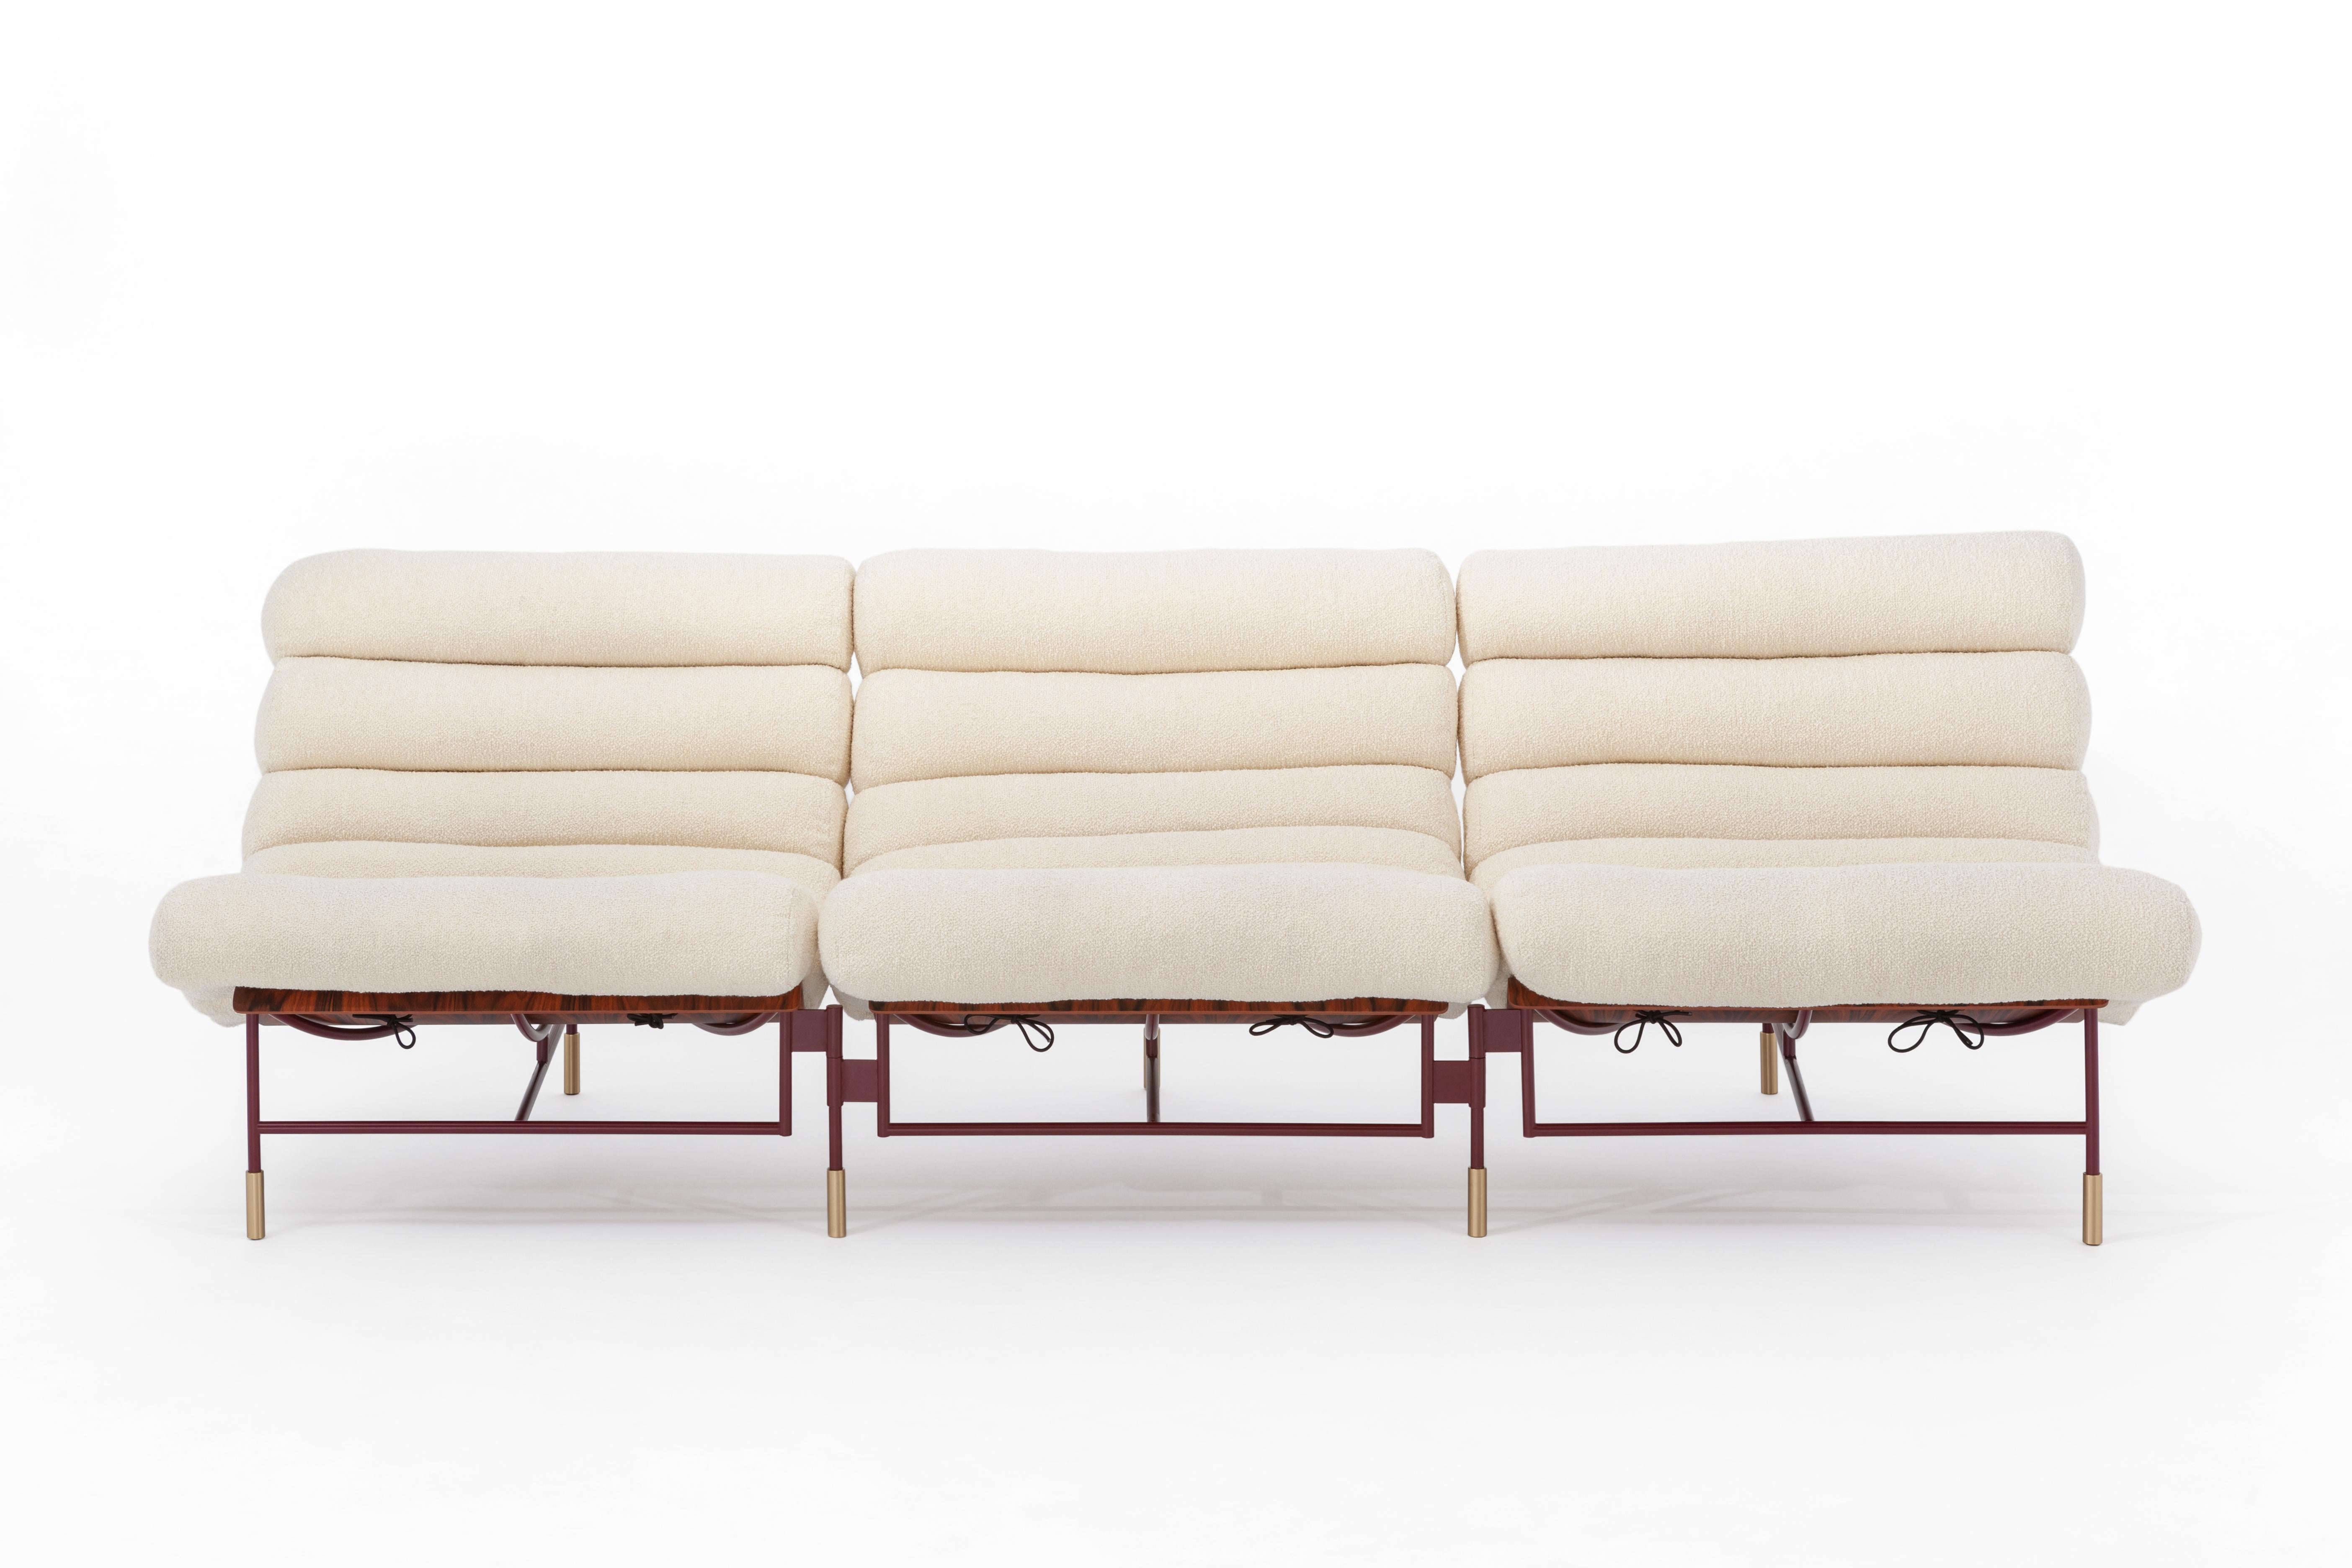 Nuvola sofa by SEM
Dimensions: D235 x W82 x H72 cm
Material: Structure in lacquered iron, brass details, shell in Santos rosewood,
Padding in feather with upholstery in leather.
Costumized leather and fabric available on request.

By